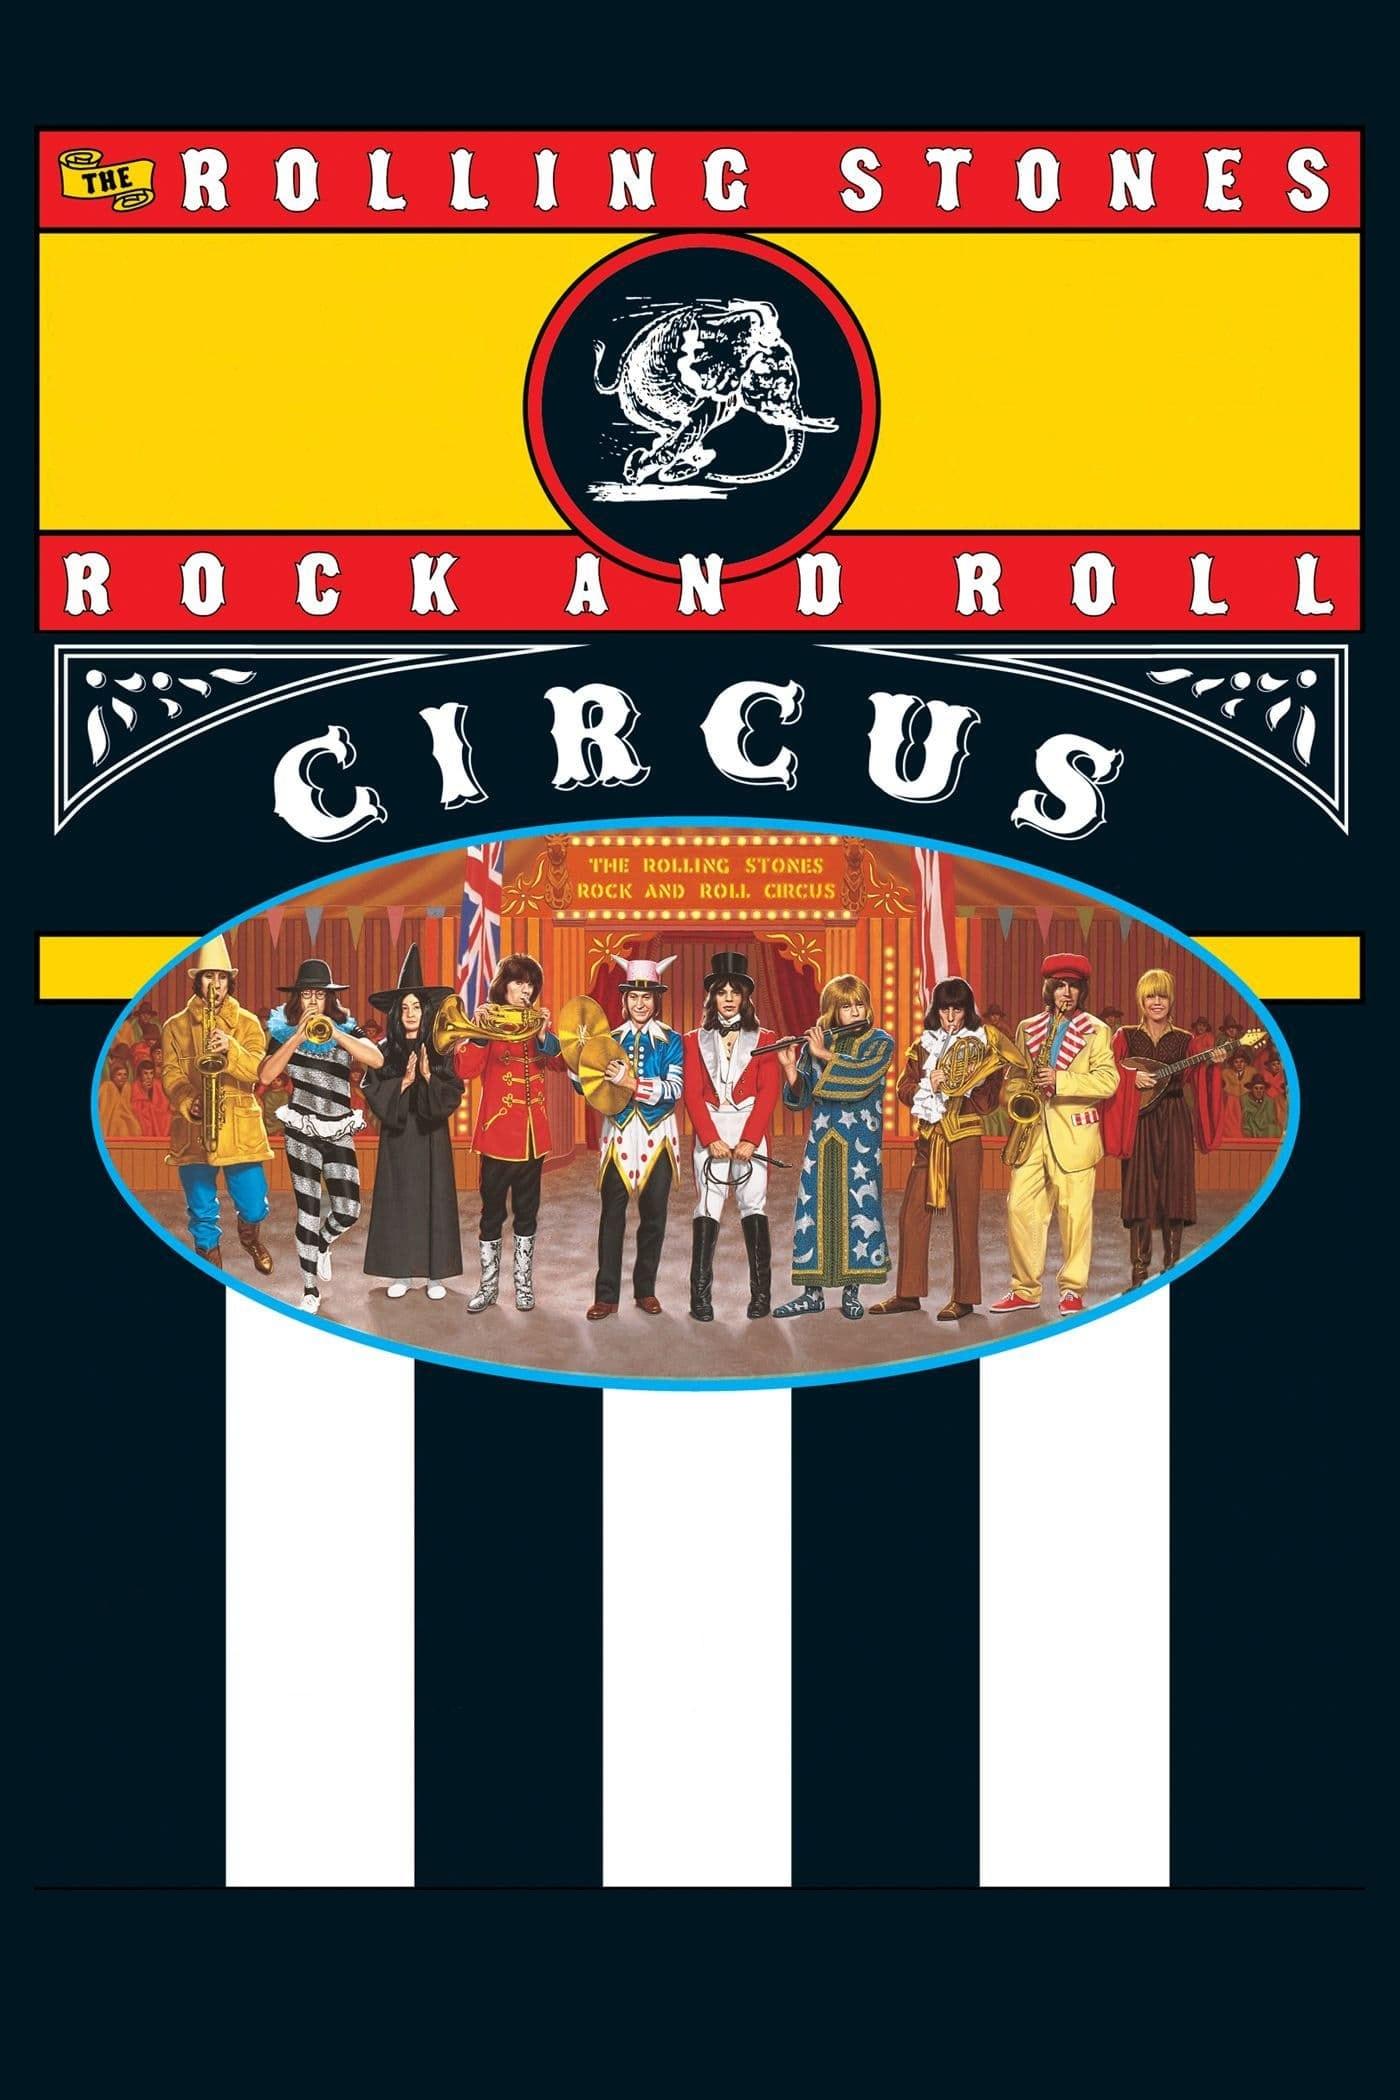 The Rolling Stones Rock and Roll Circus poster